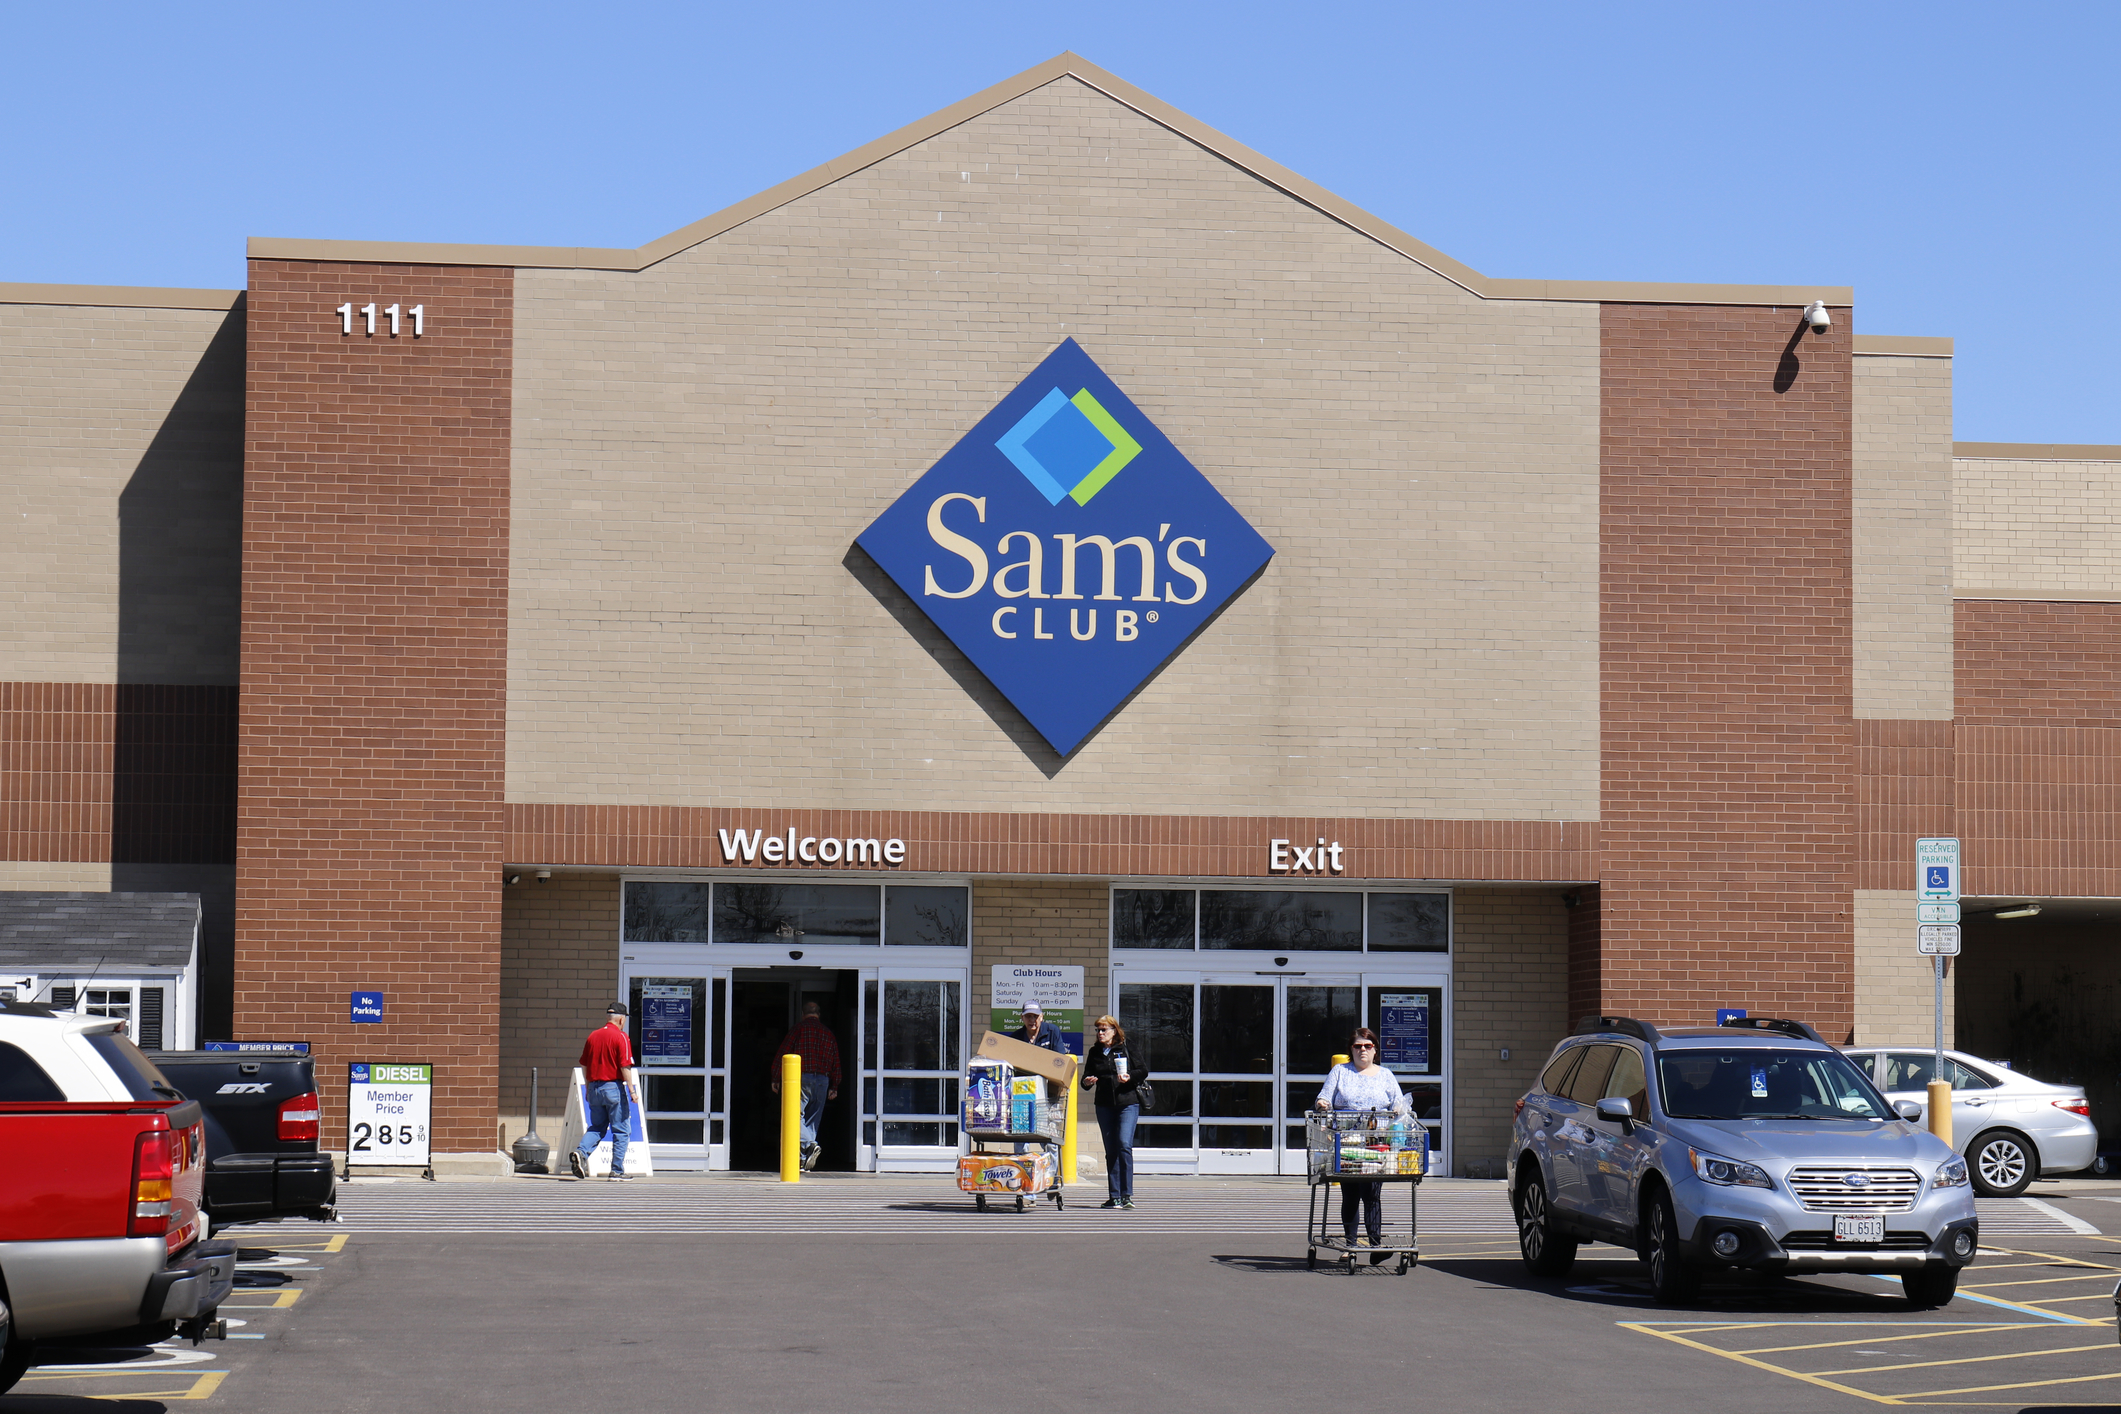 New Sam’s Club members: Get a free slice of pizza and drink